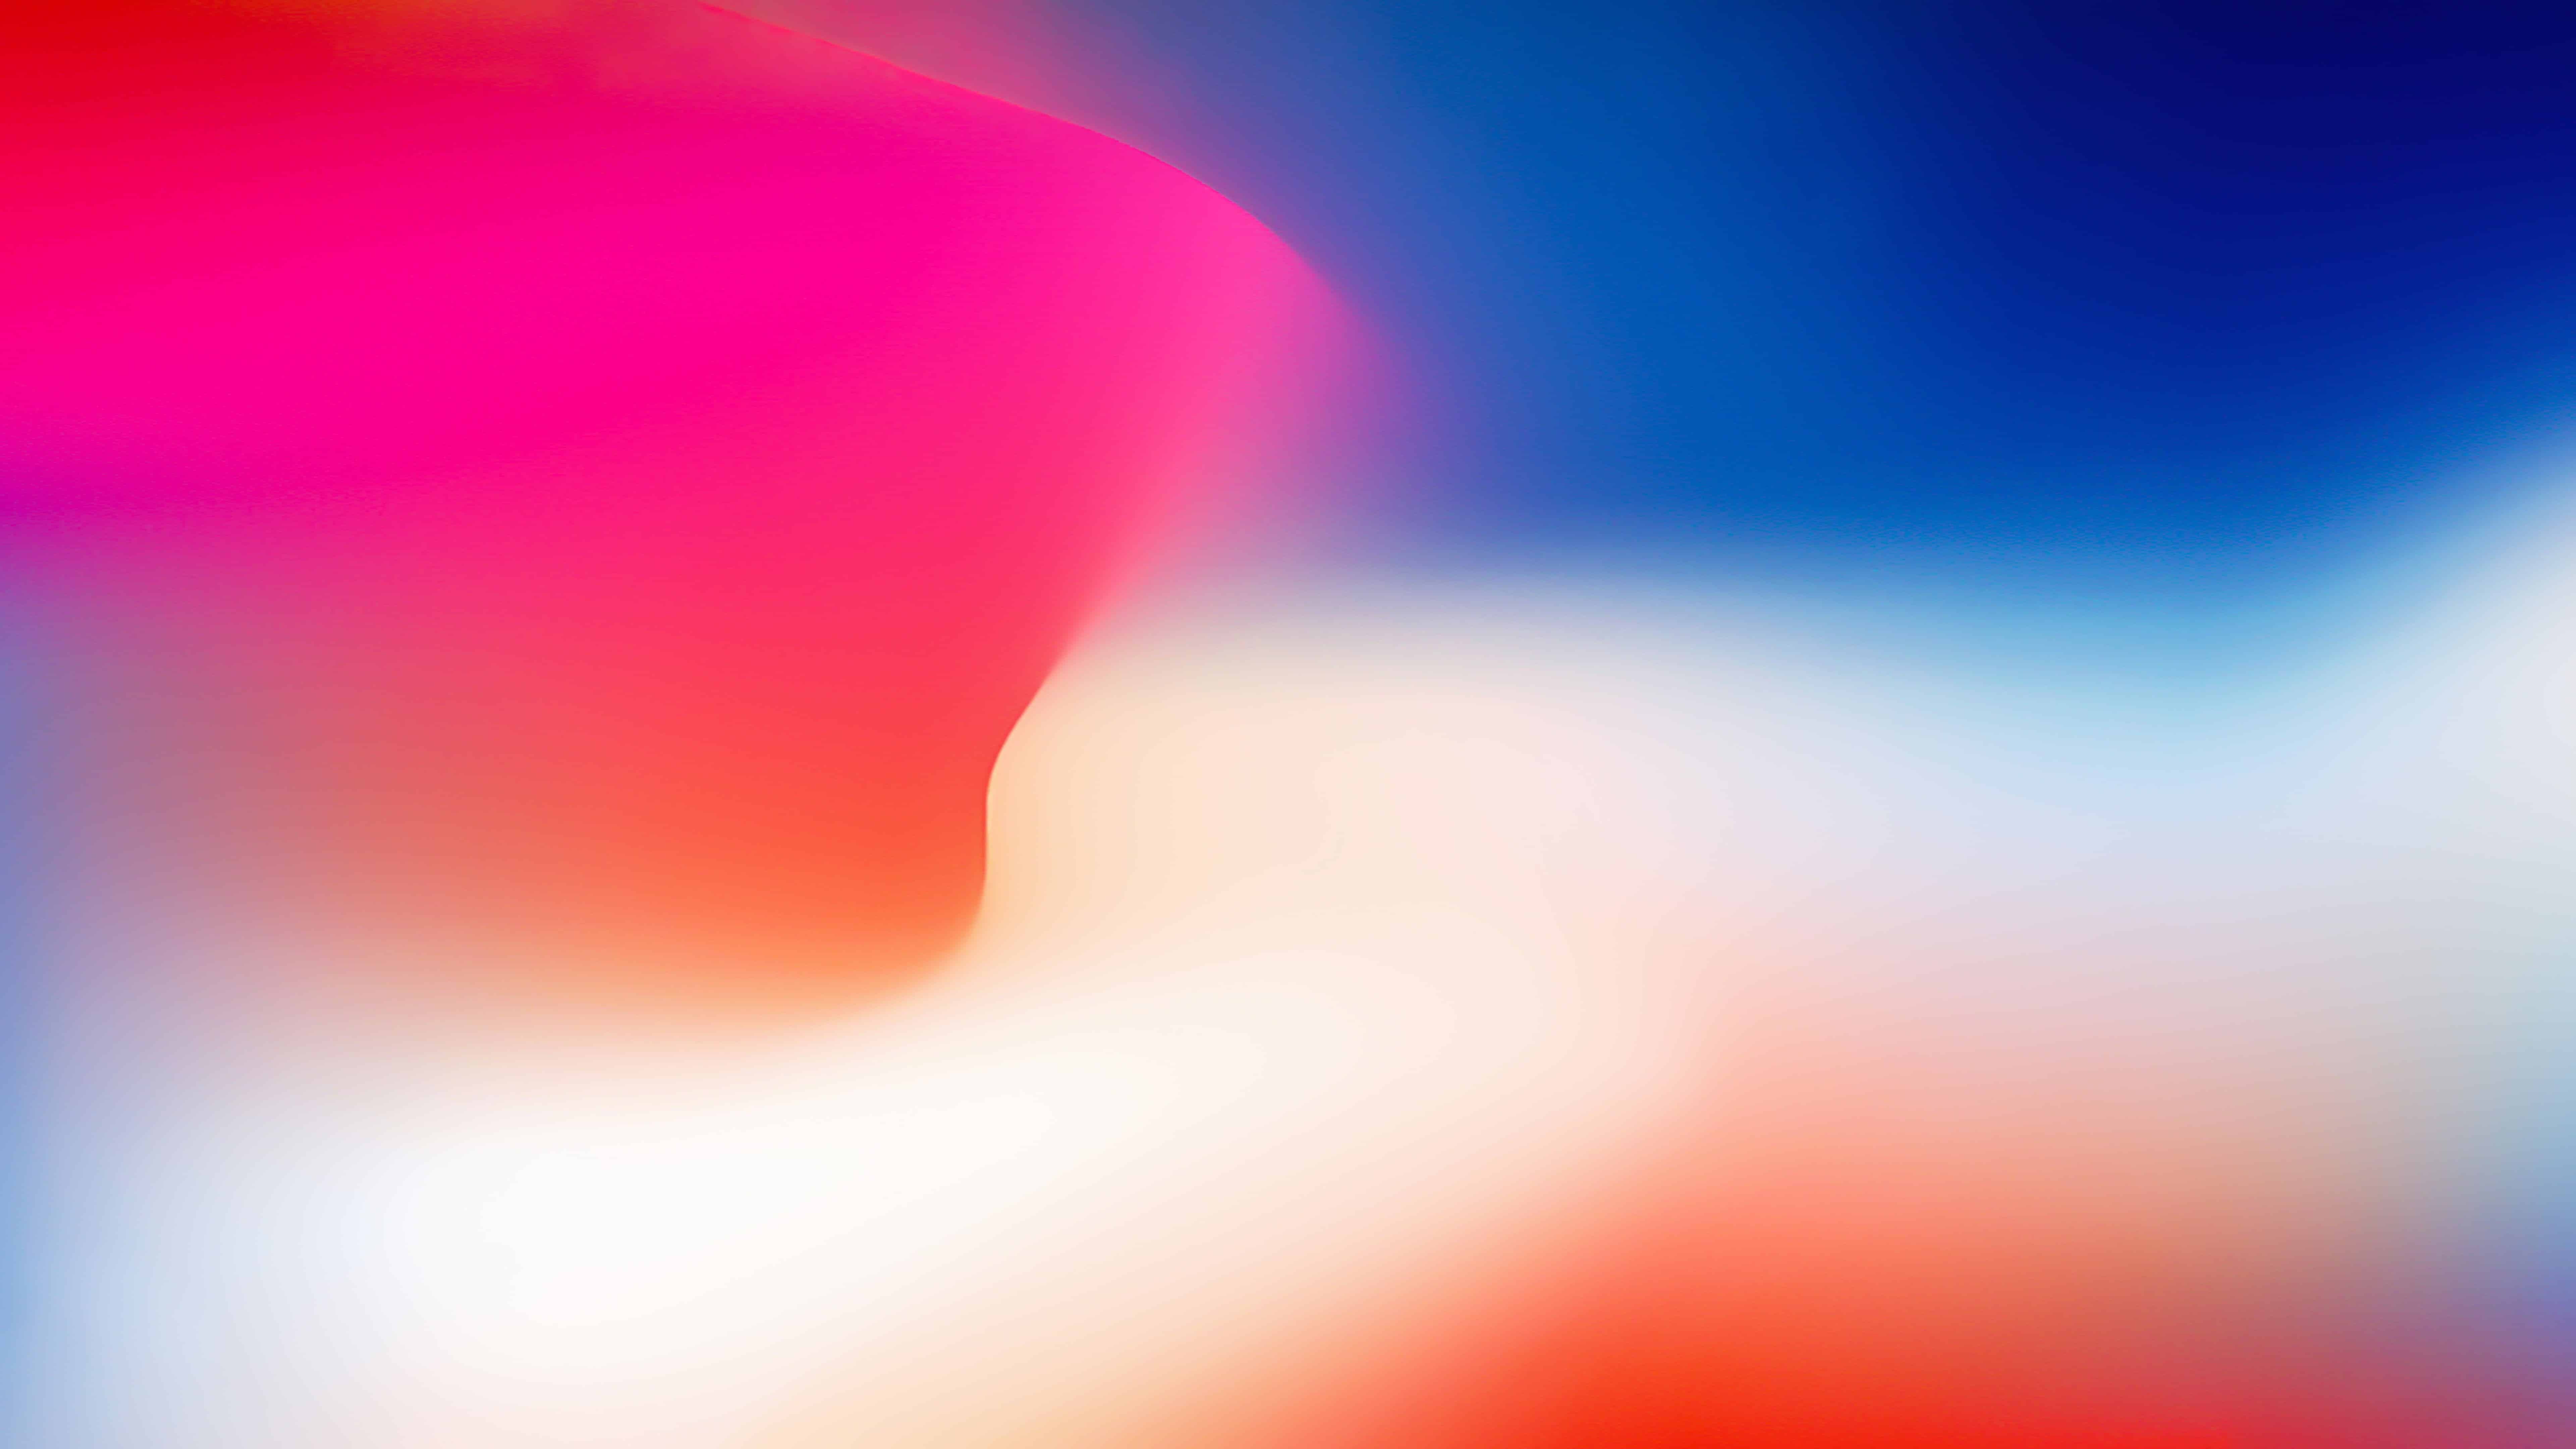 16] IPhone X UHD Wallpapers on